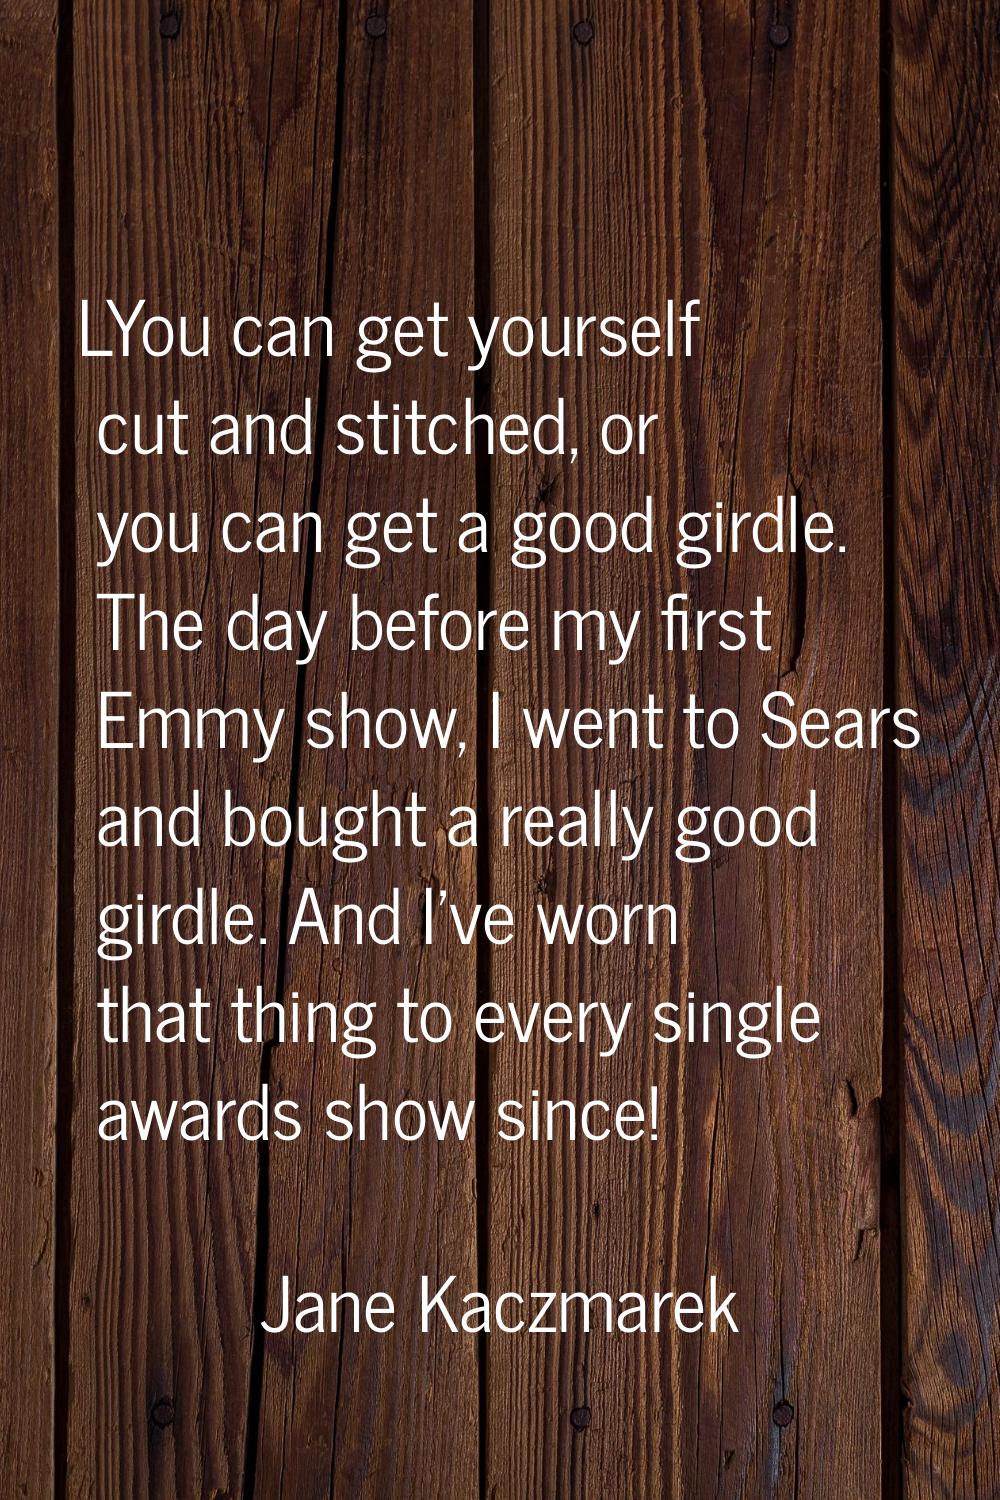 LYou can get yourself cut and stitched, or you can get a good girdle. The day before my first Emmy 